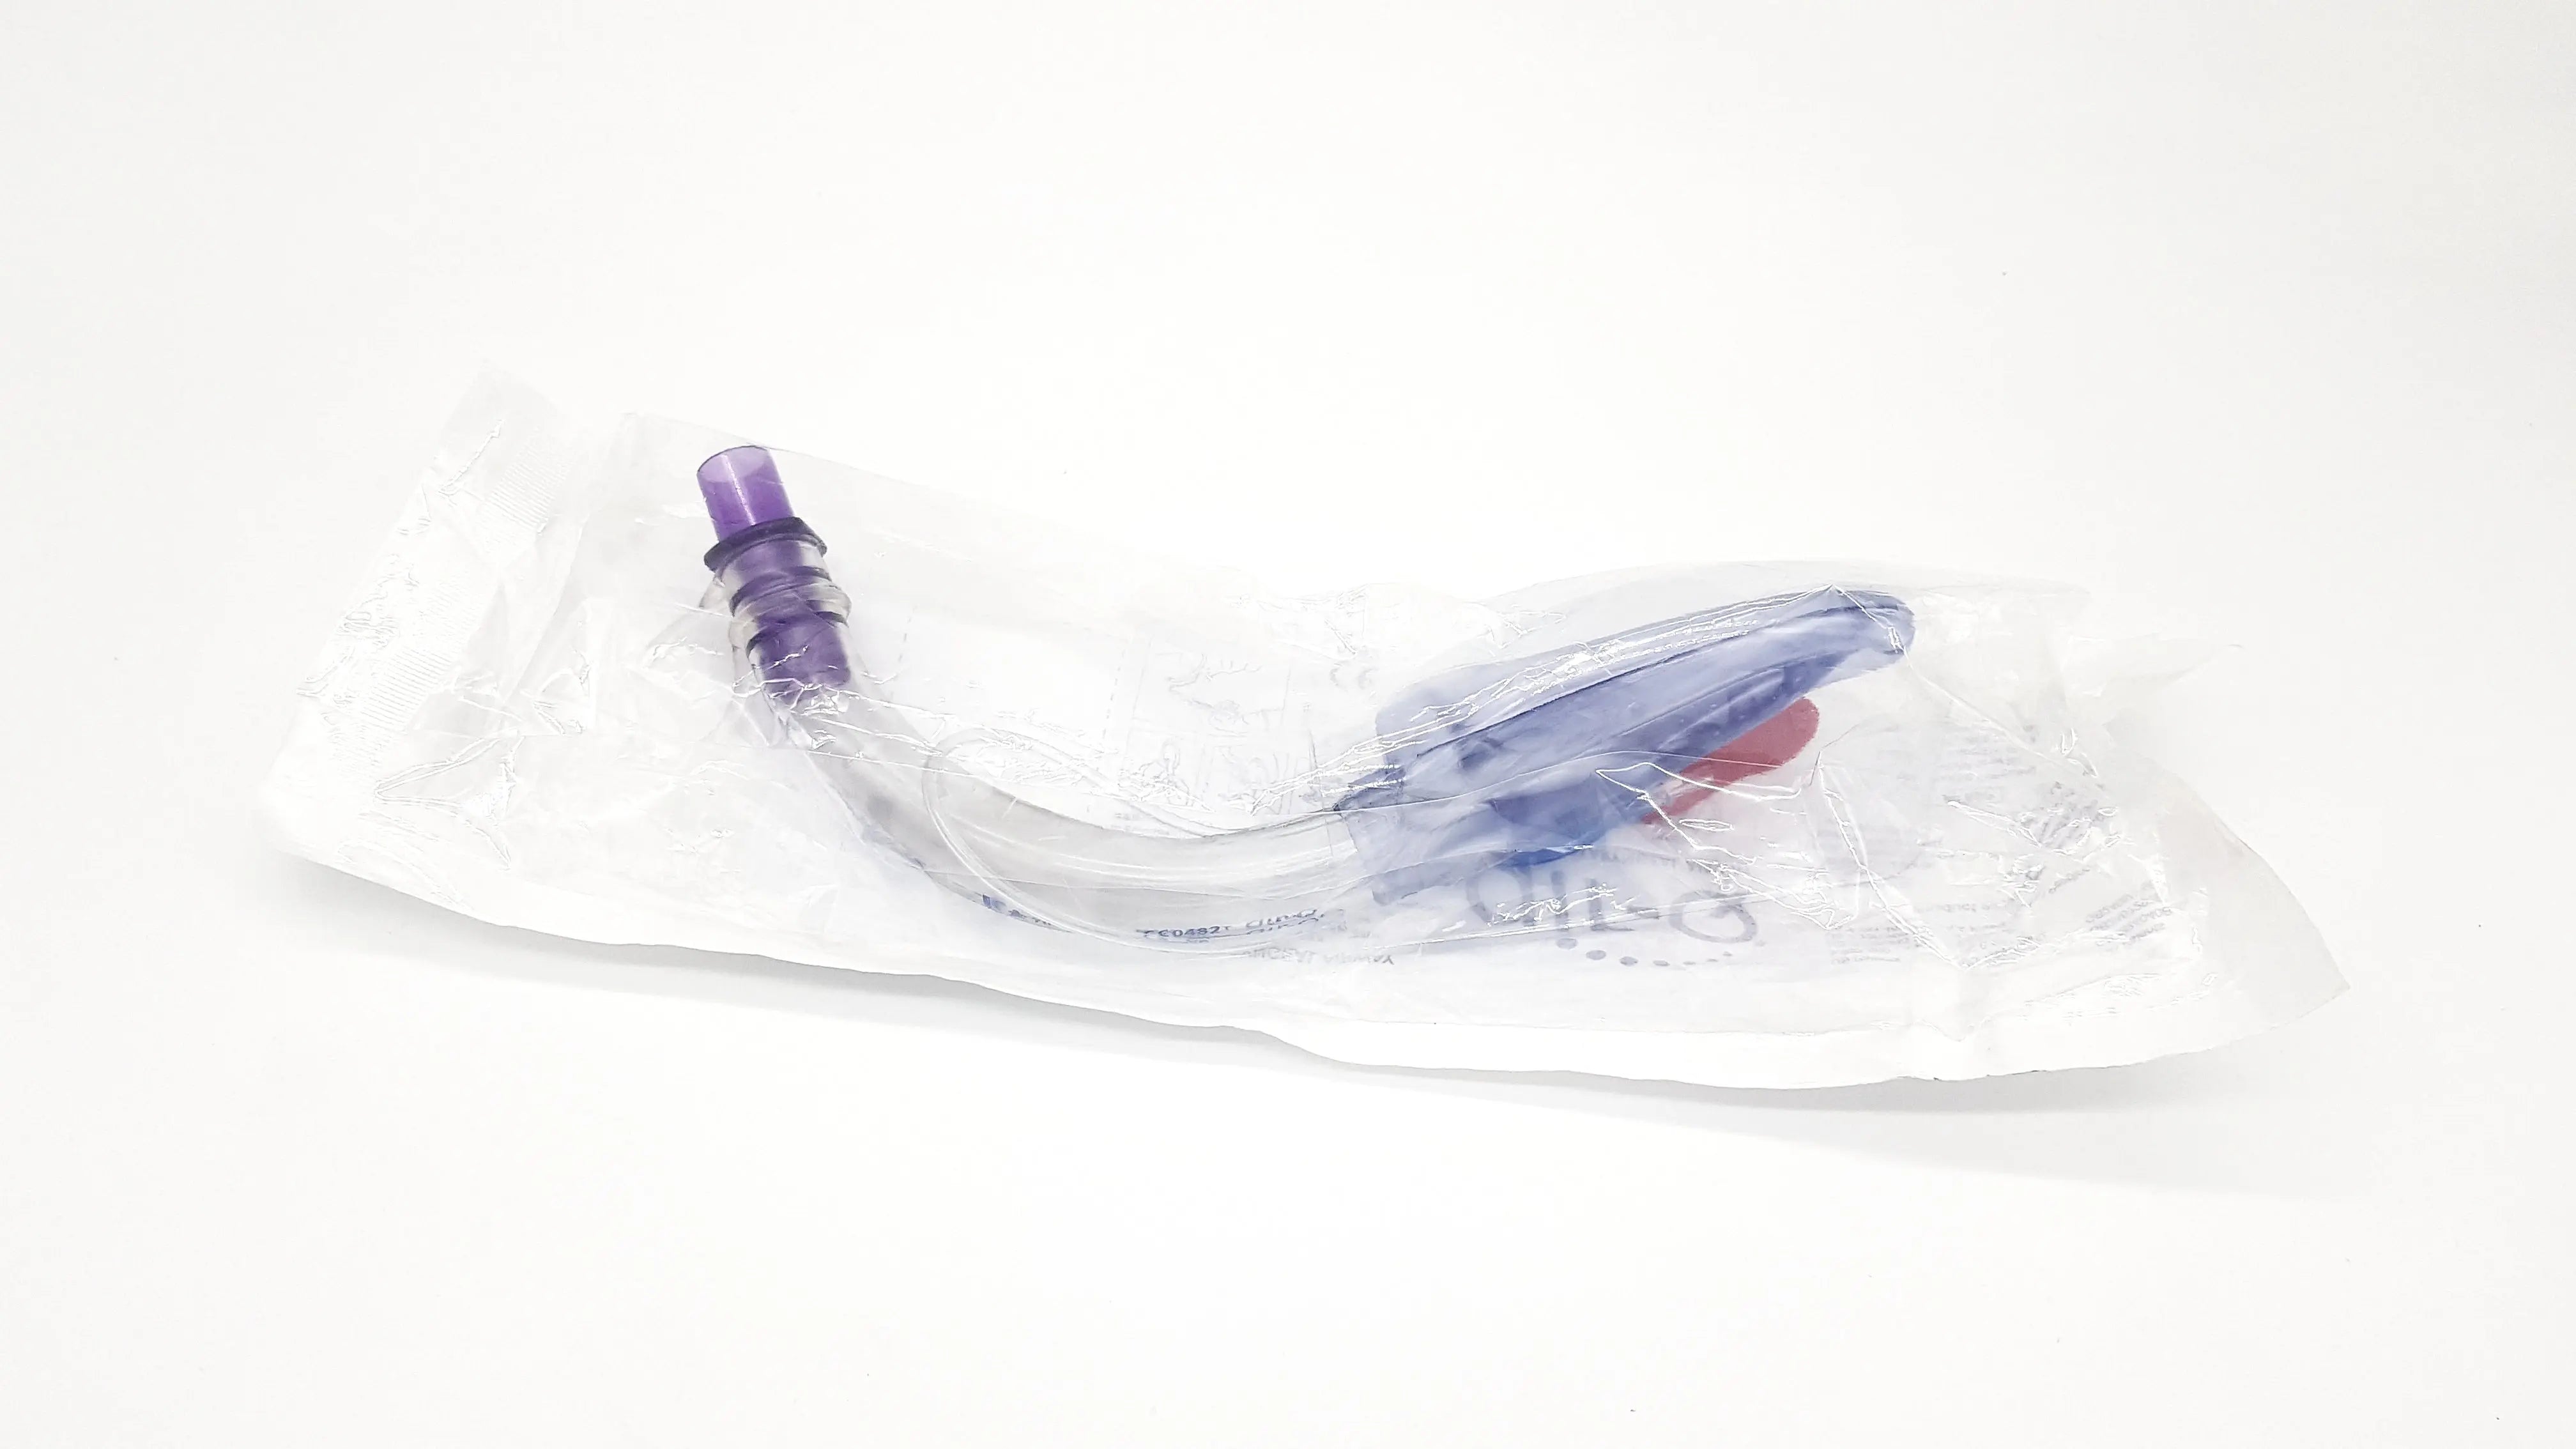 Load image into Gallery viewer, A Biomedical Service AIR-QSP INTUBATING LARYNGEAL AIRWAY COOKGAS 